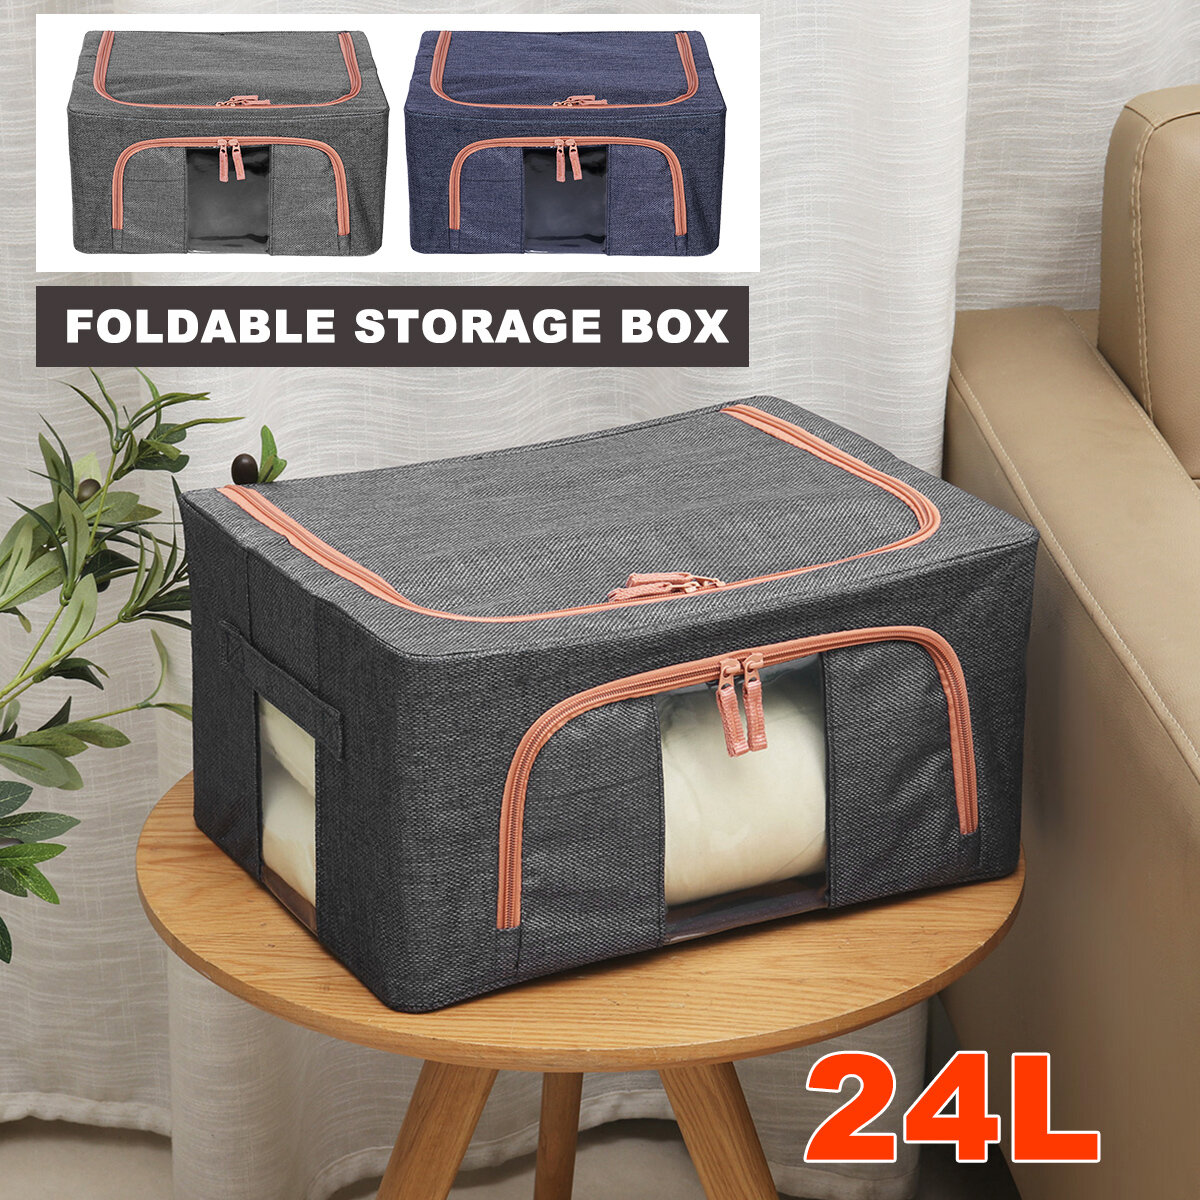 

24L Clothes Storage Bag Storage Box Fabric Folding Clothes Sorting Box Steel Frame Toy Storage box Cotton linen Home Org